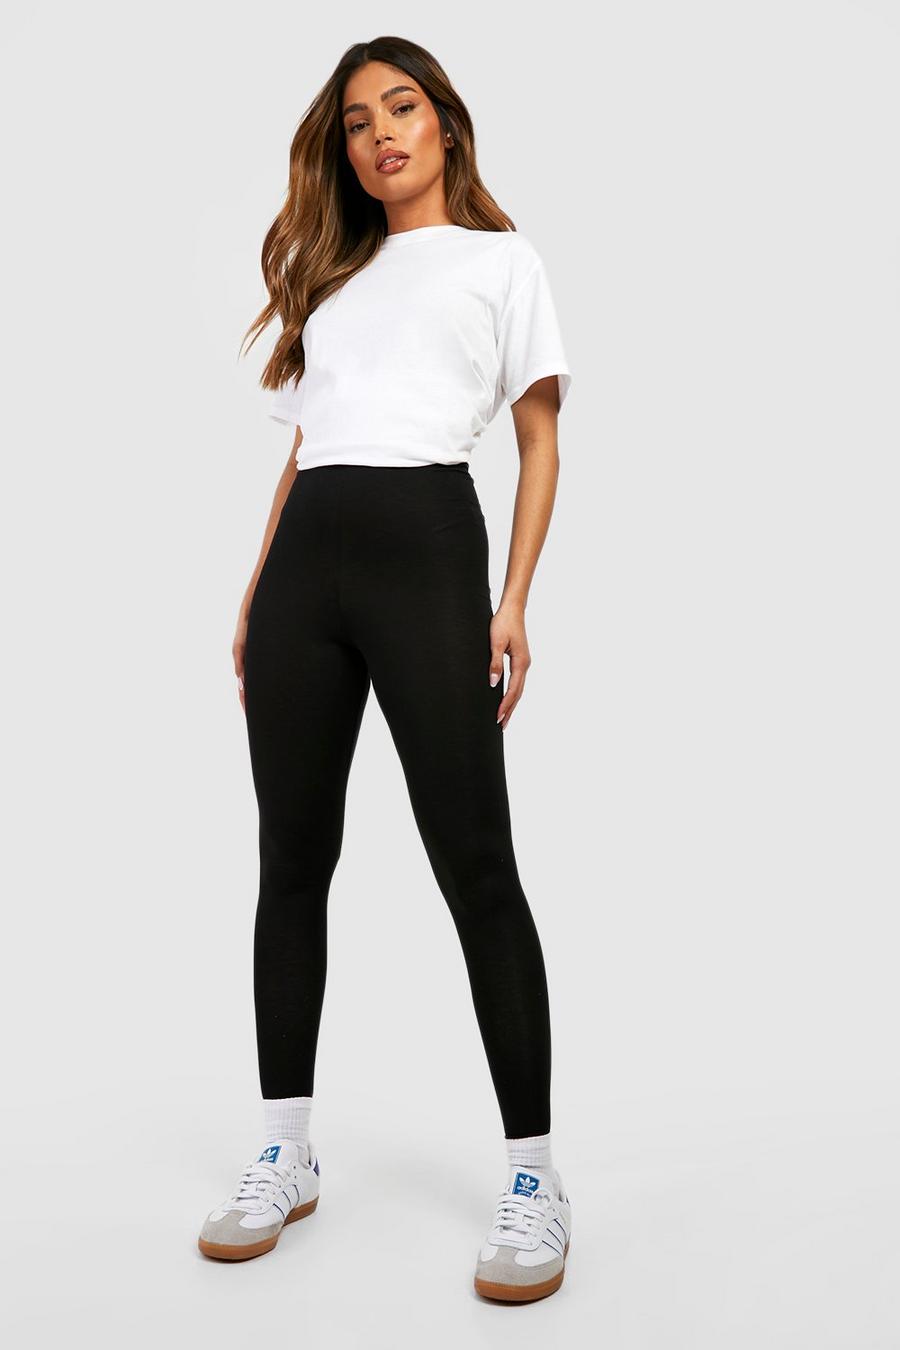 Black Ruched Bum Booty Boosting Jersey Leggings